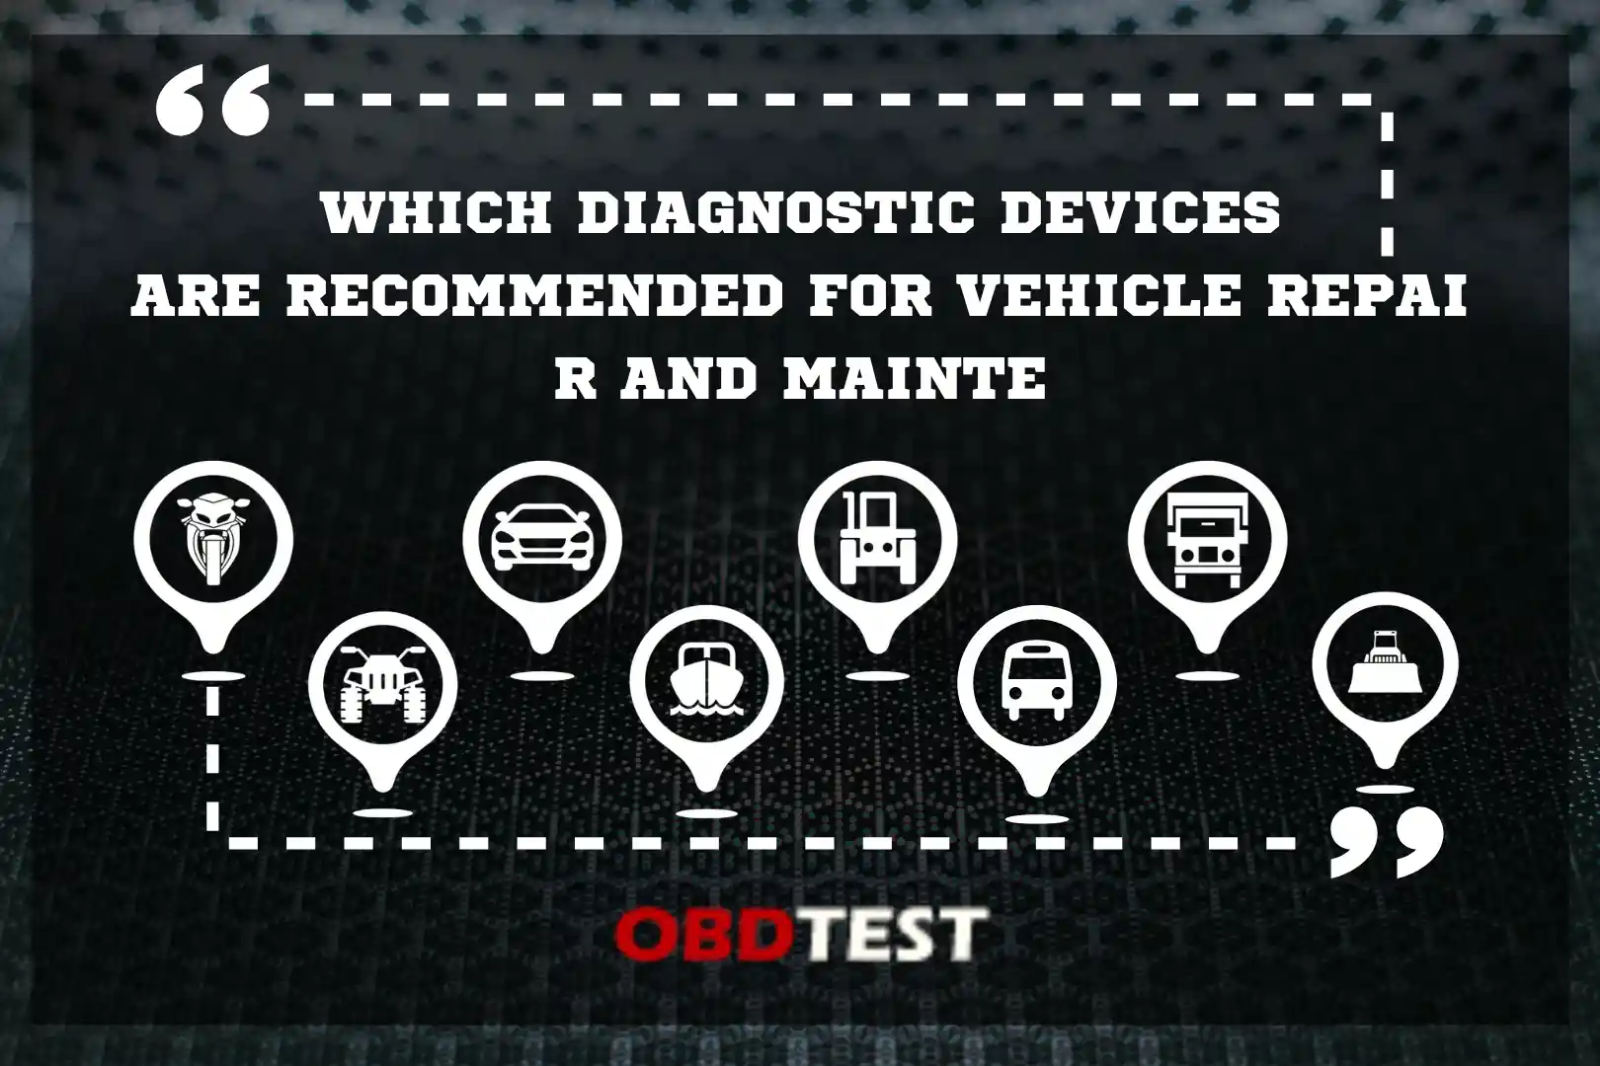 Which diagnostic devices are recommended for vehicle repair and maintenance?